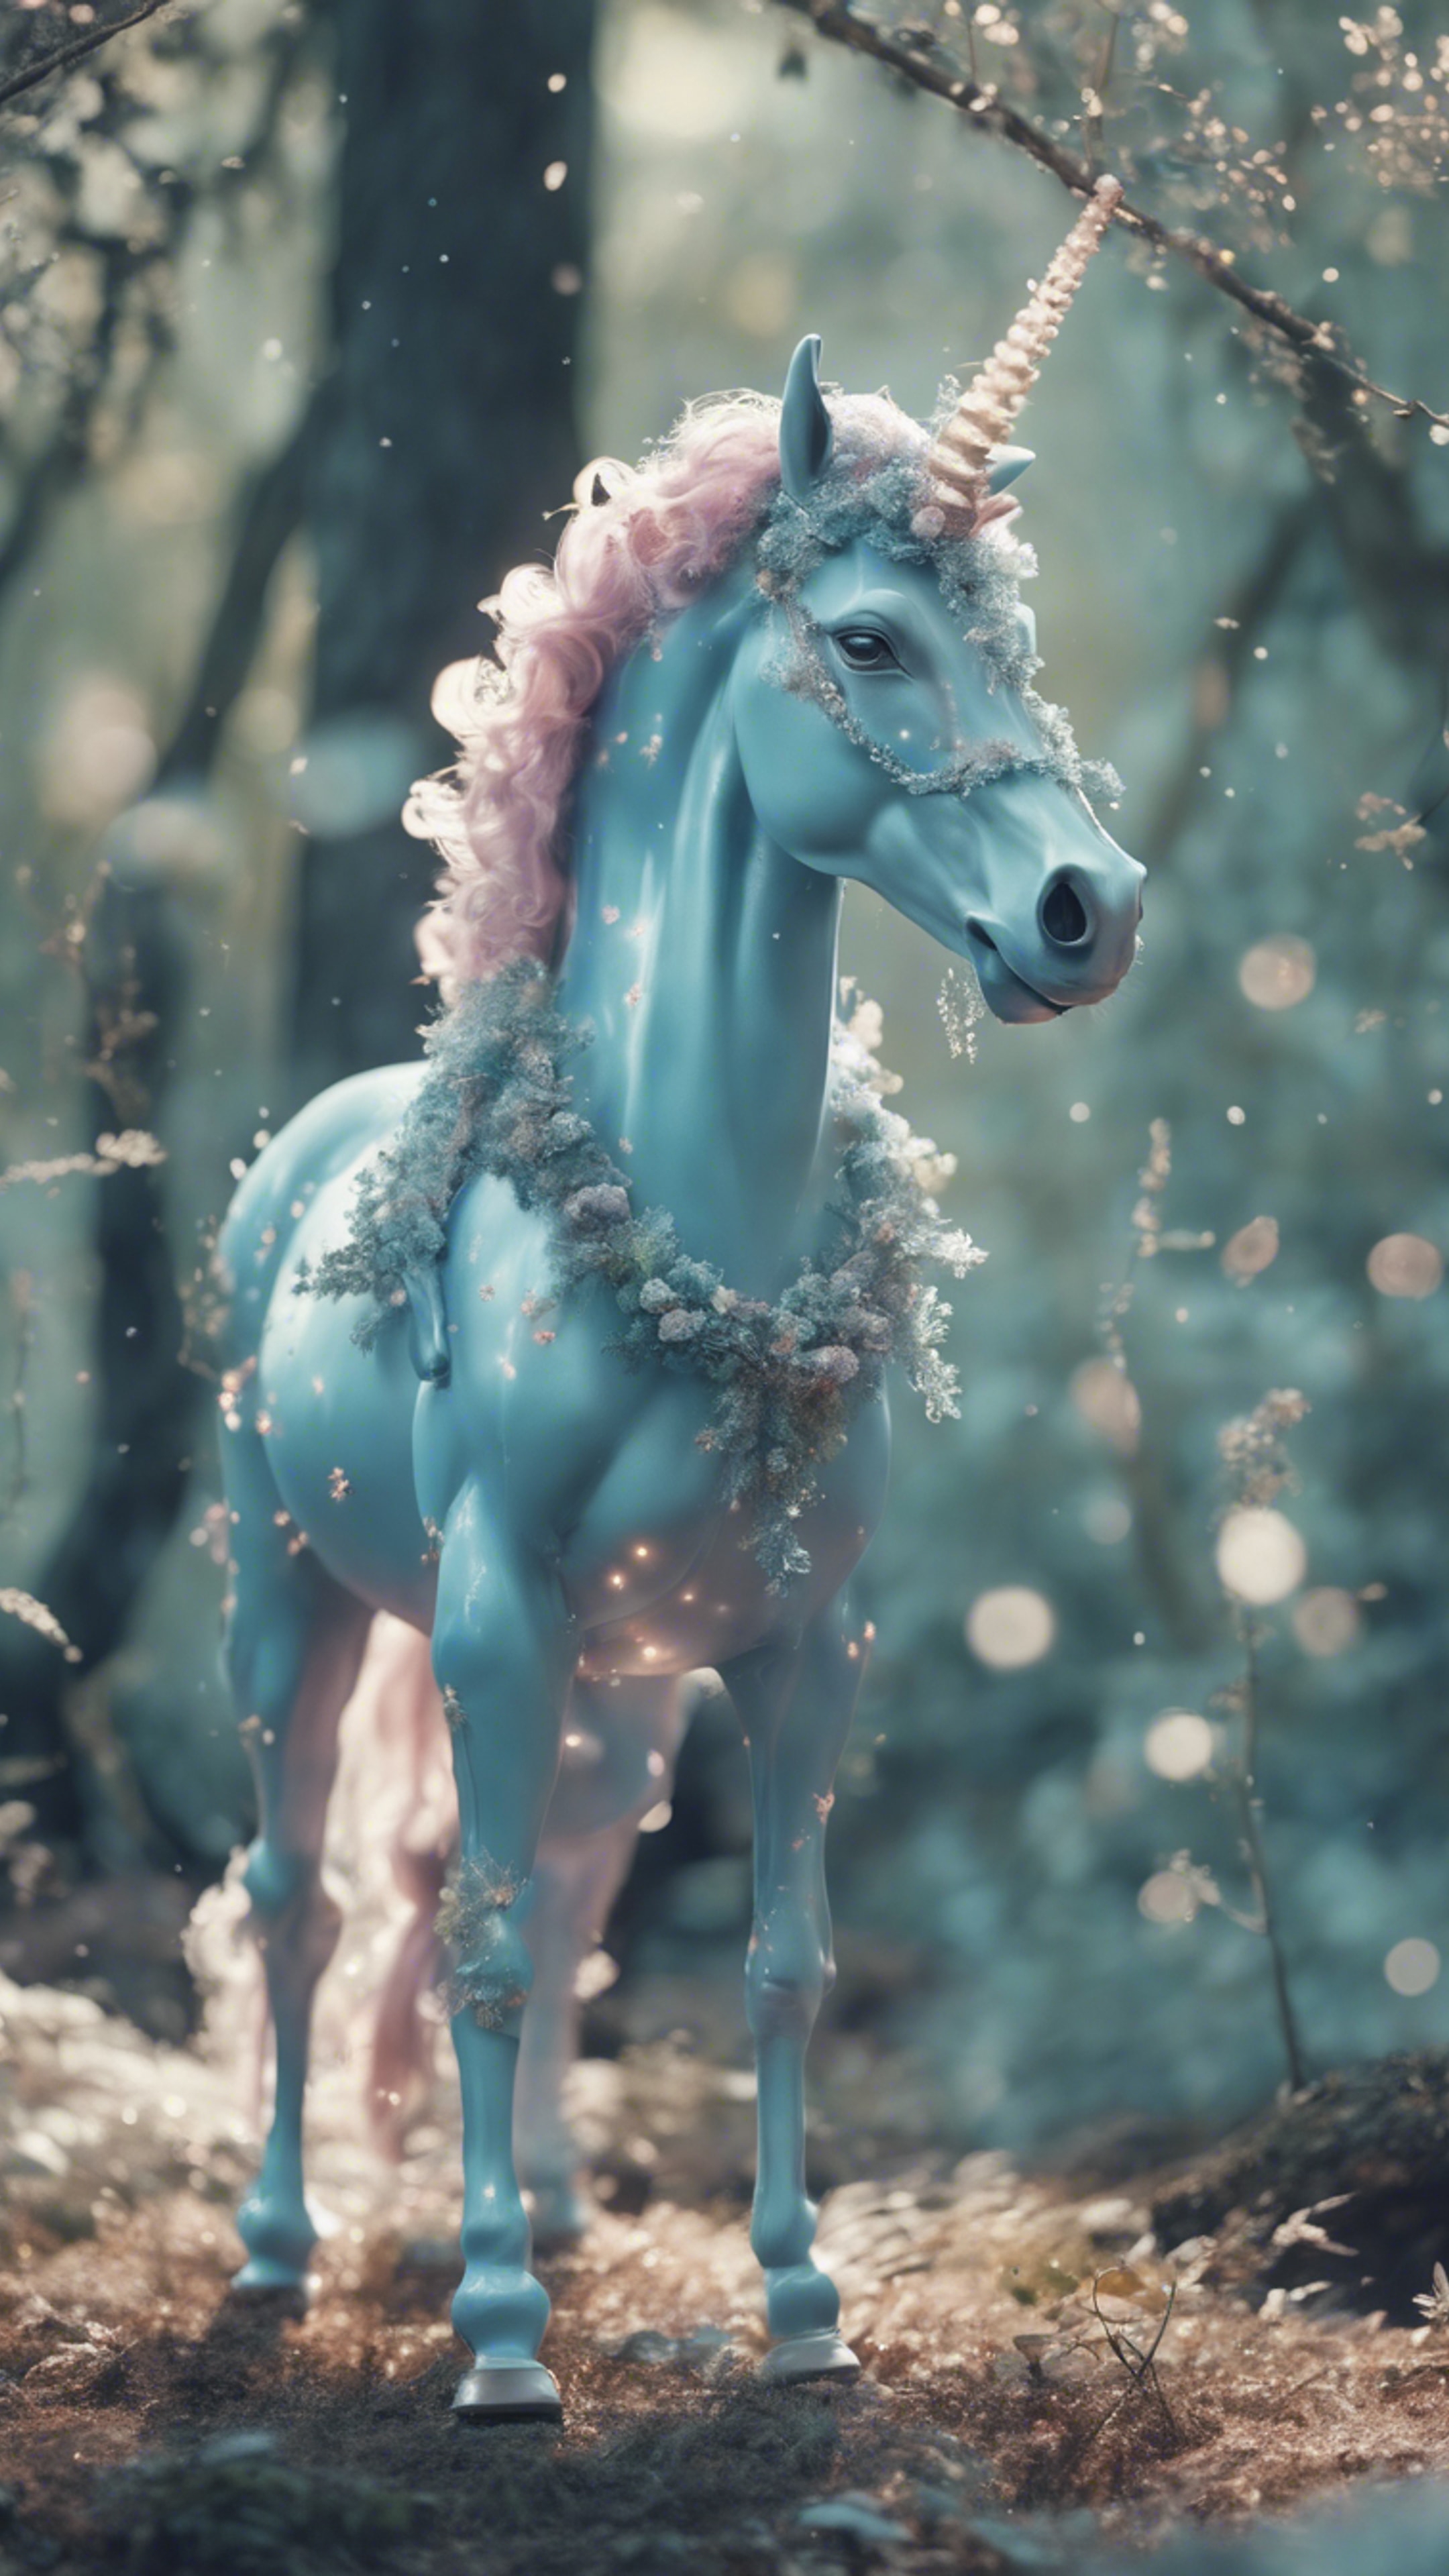 A whimsical pastel blue unicorn standing in a magical forest.壁紙[9fc4aee892994beaa25a]